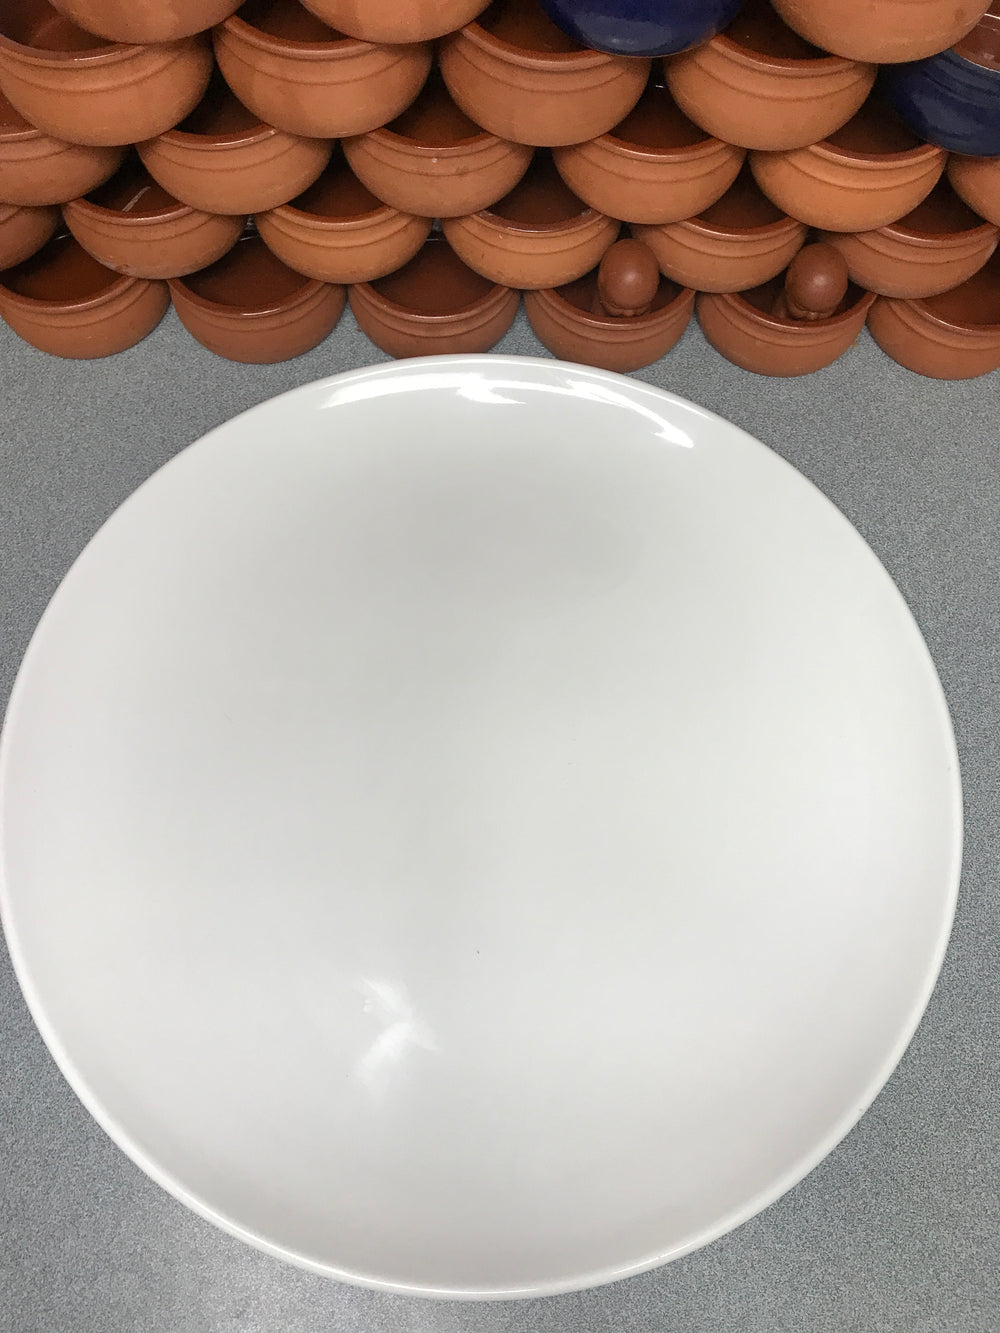 2 x Melamine Plates 45cm Great for Christmas, Parties, BBQ and Breakfast In Bed